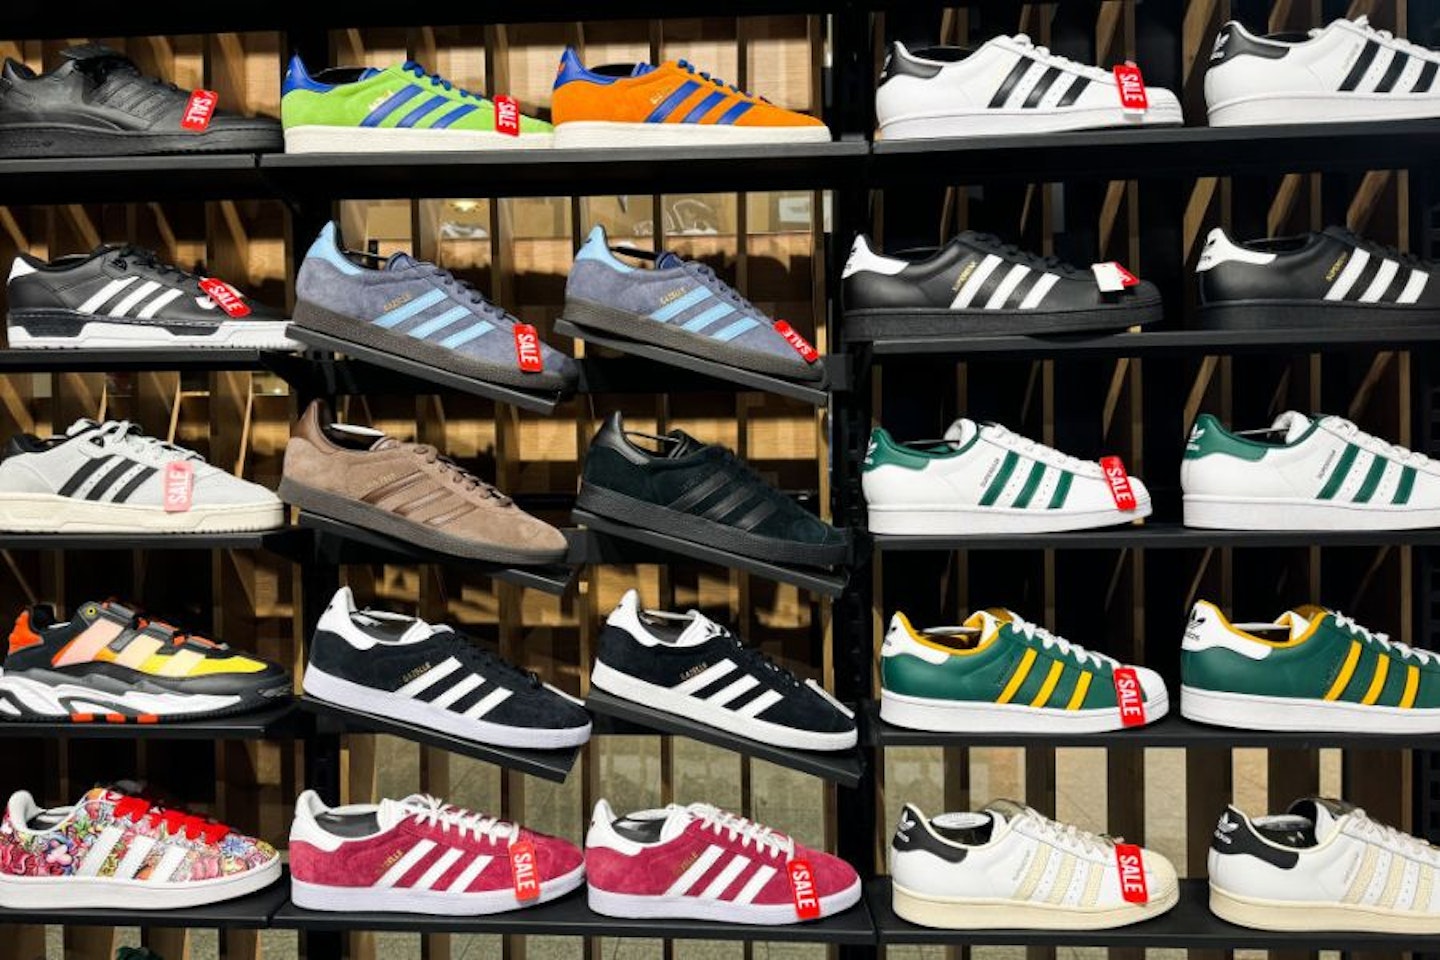 A selection of the most famous Adidas shoes